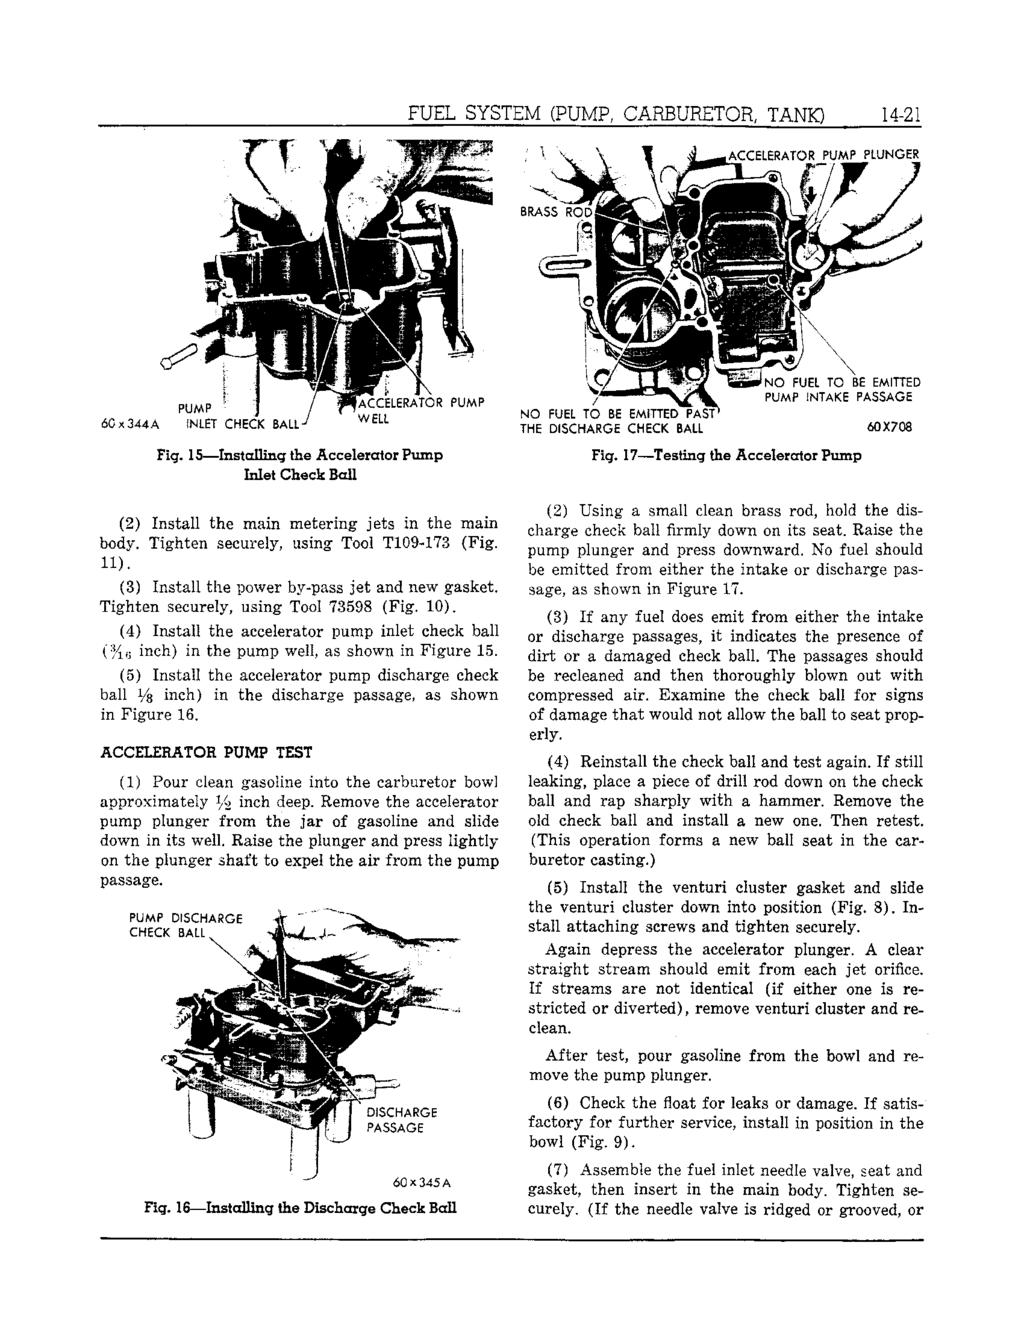 FUEL SYSTEM (PUMP, CARBURETOR, TANK) 14-21 Fig. 15 Installing the Accelerator Pump Met Check BaH - (2)- Install the main metering jets in the main body. Tighten securely, using Tool T109-173 (Fig.